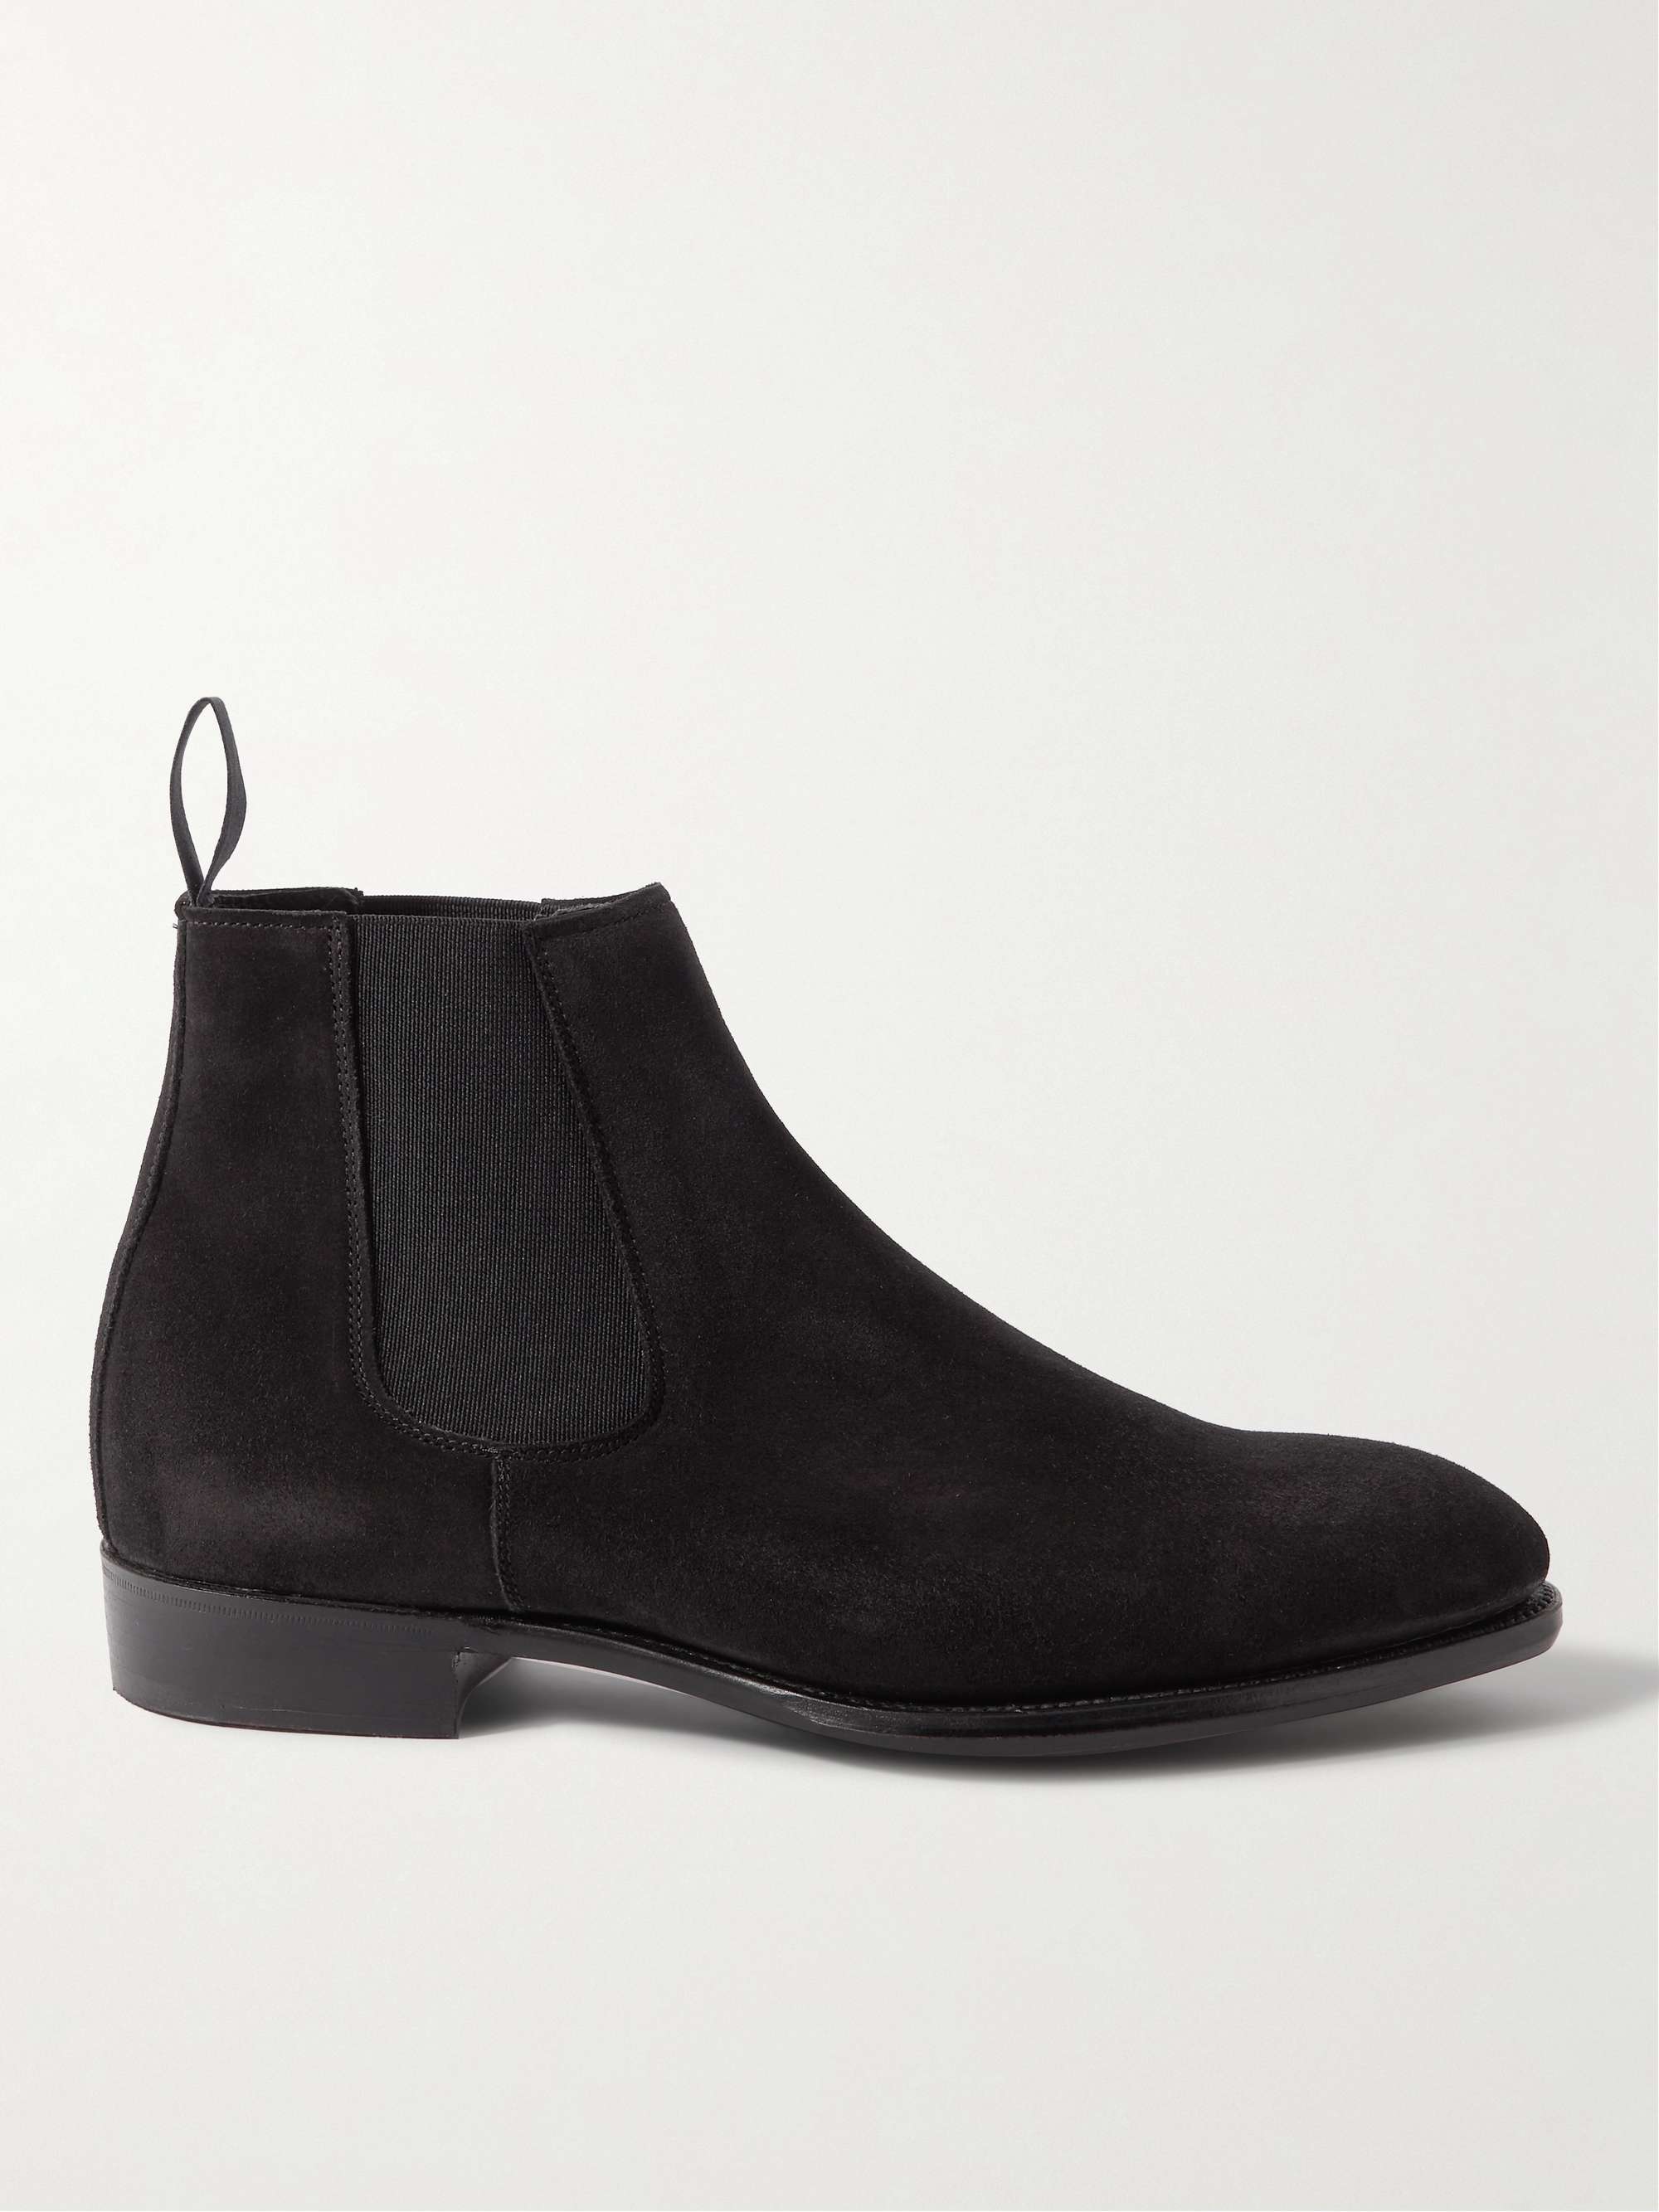 GEORGE CLEVERLEY Jason Suede Chelsea Boots | MR PORTER